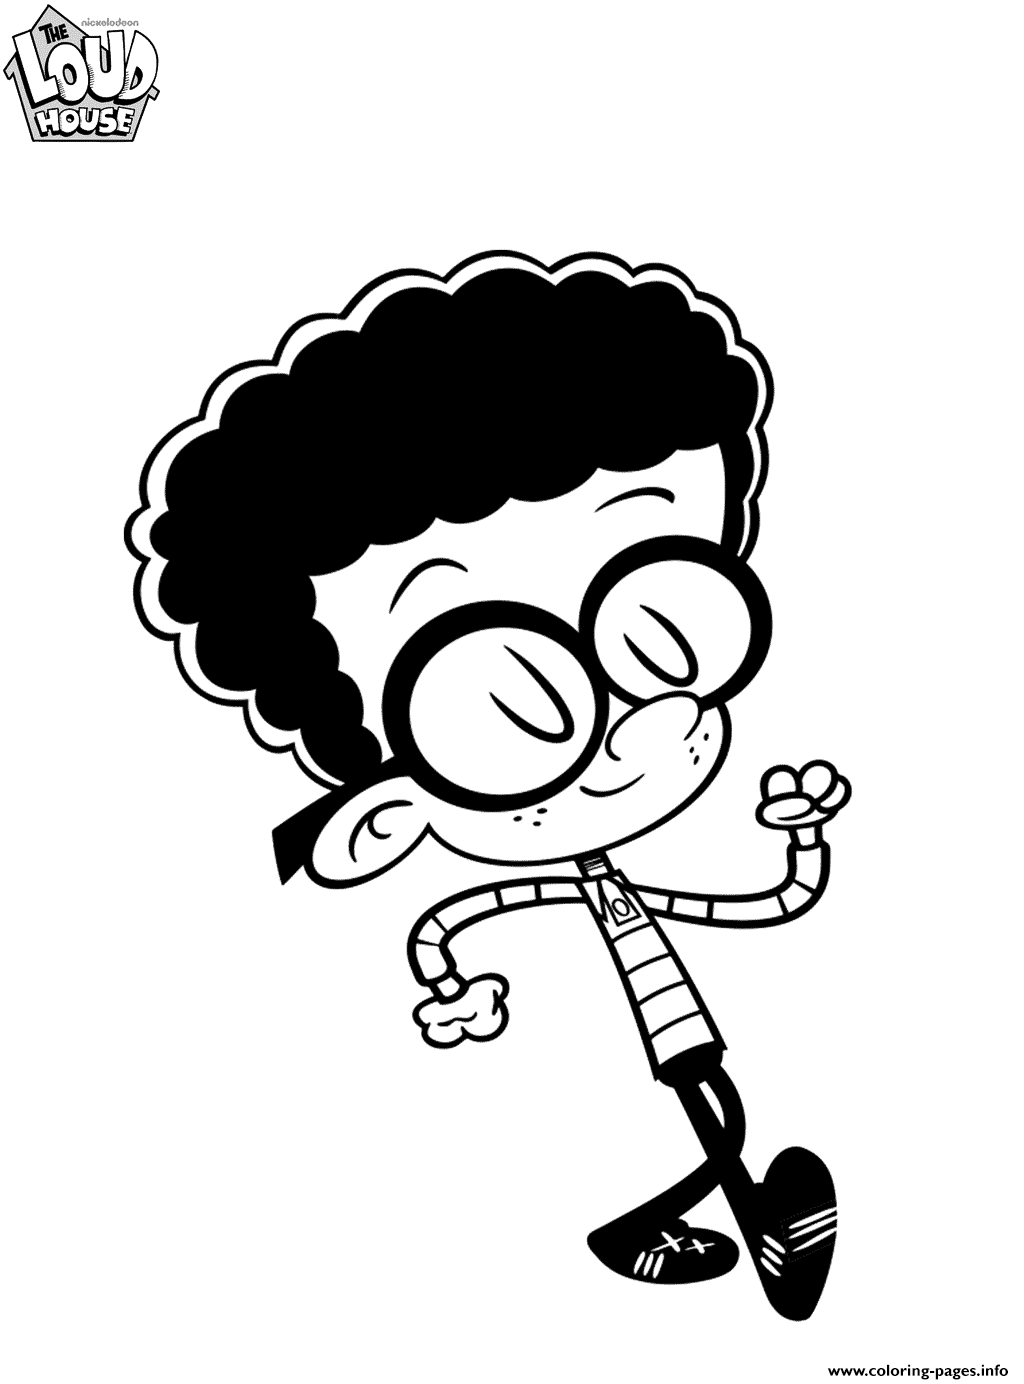 Printable Loud House Coloring Pages - Free Printable Coloring Pages for